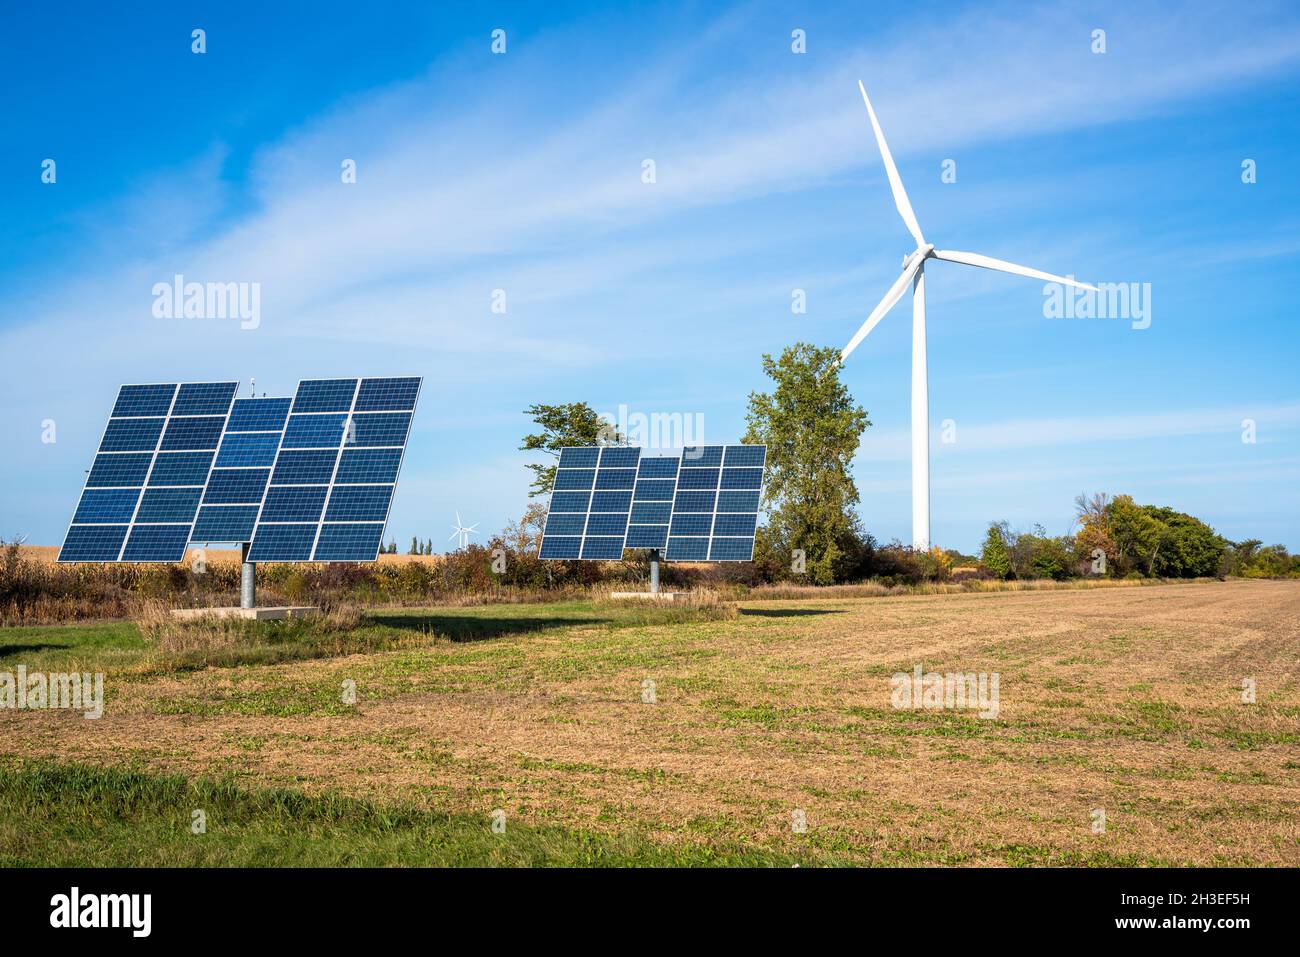 Solar panels and a wind turbine in a field under blue sky. Copy space. Renewable energy concept. Stock Photo